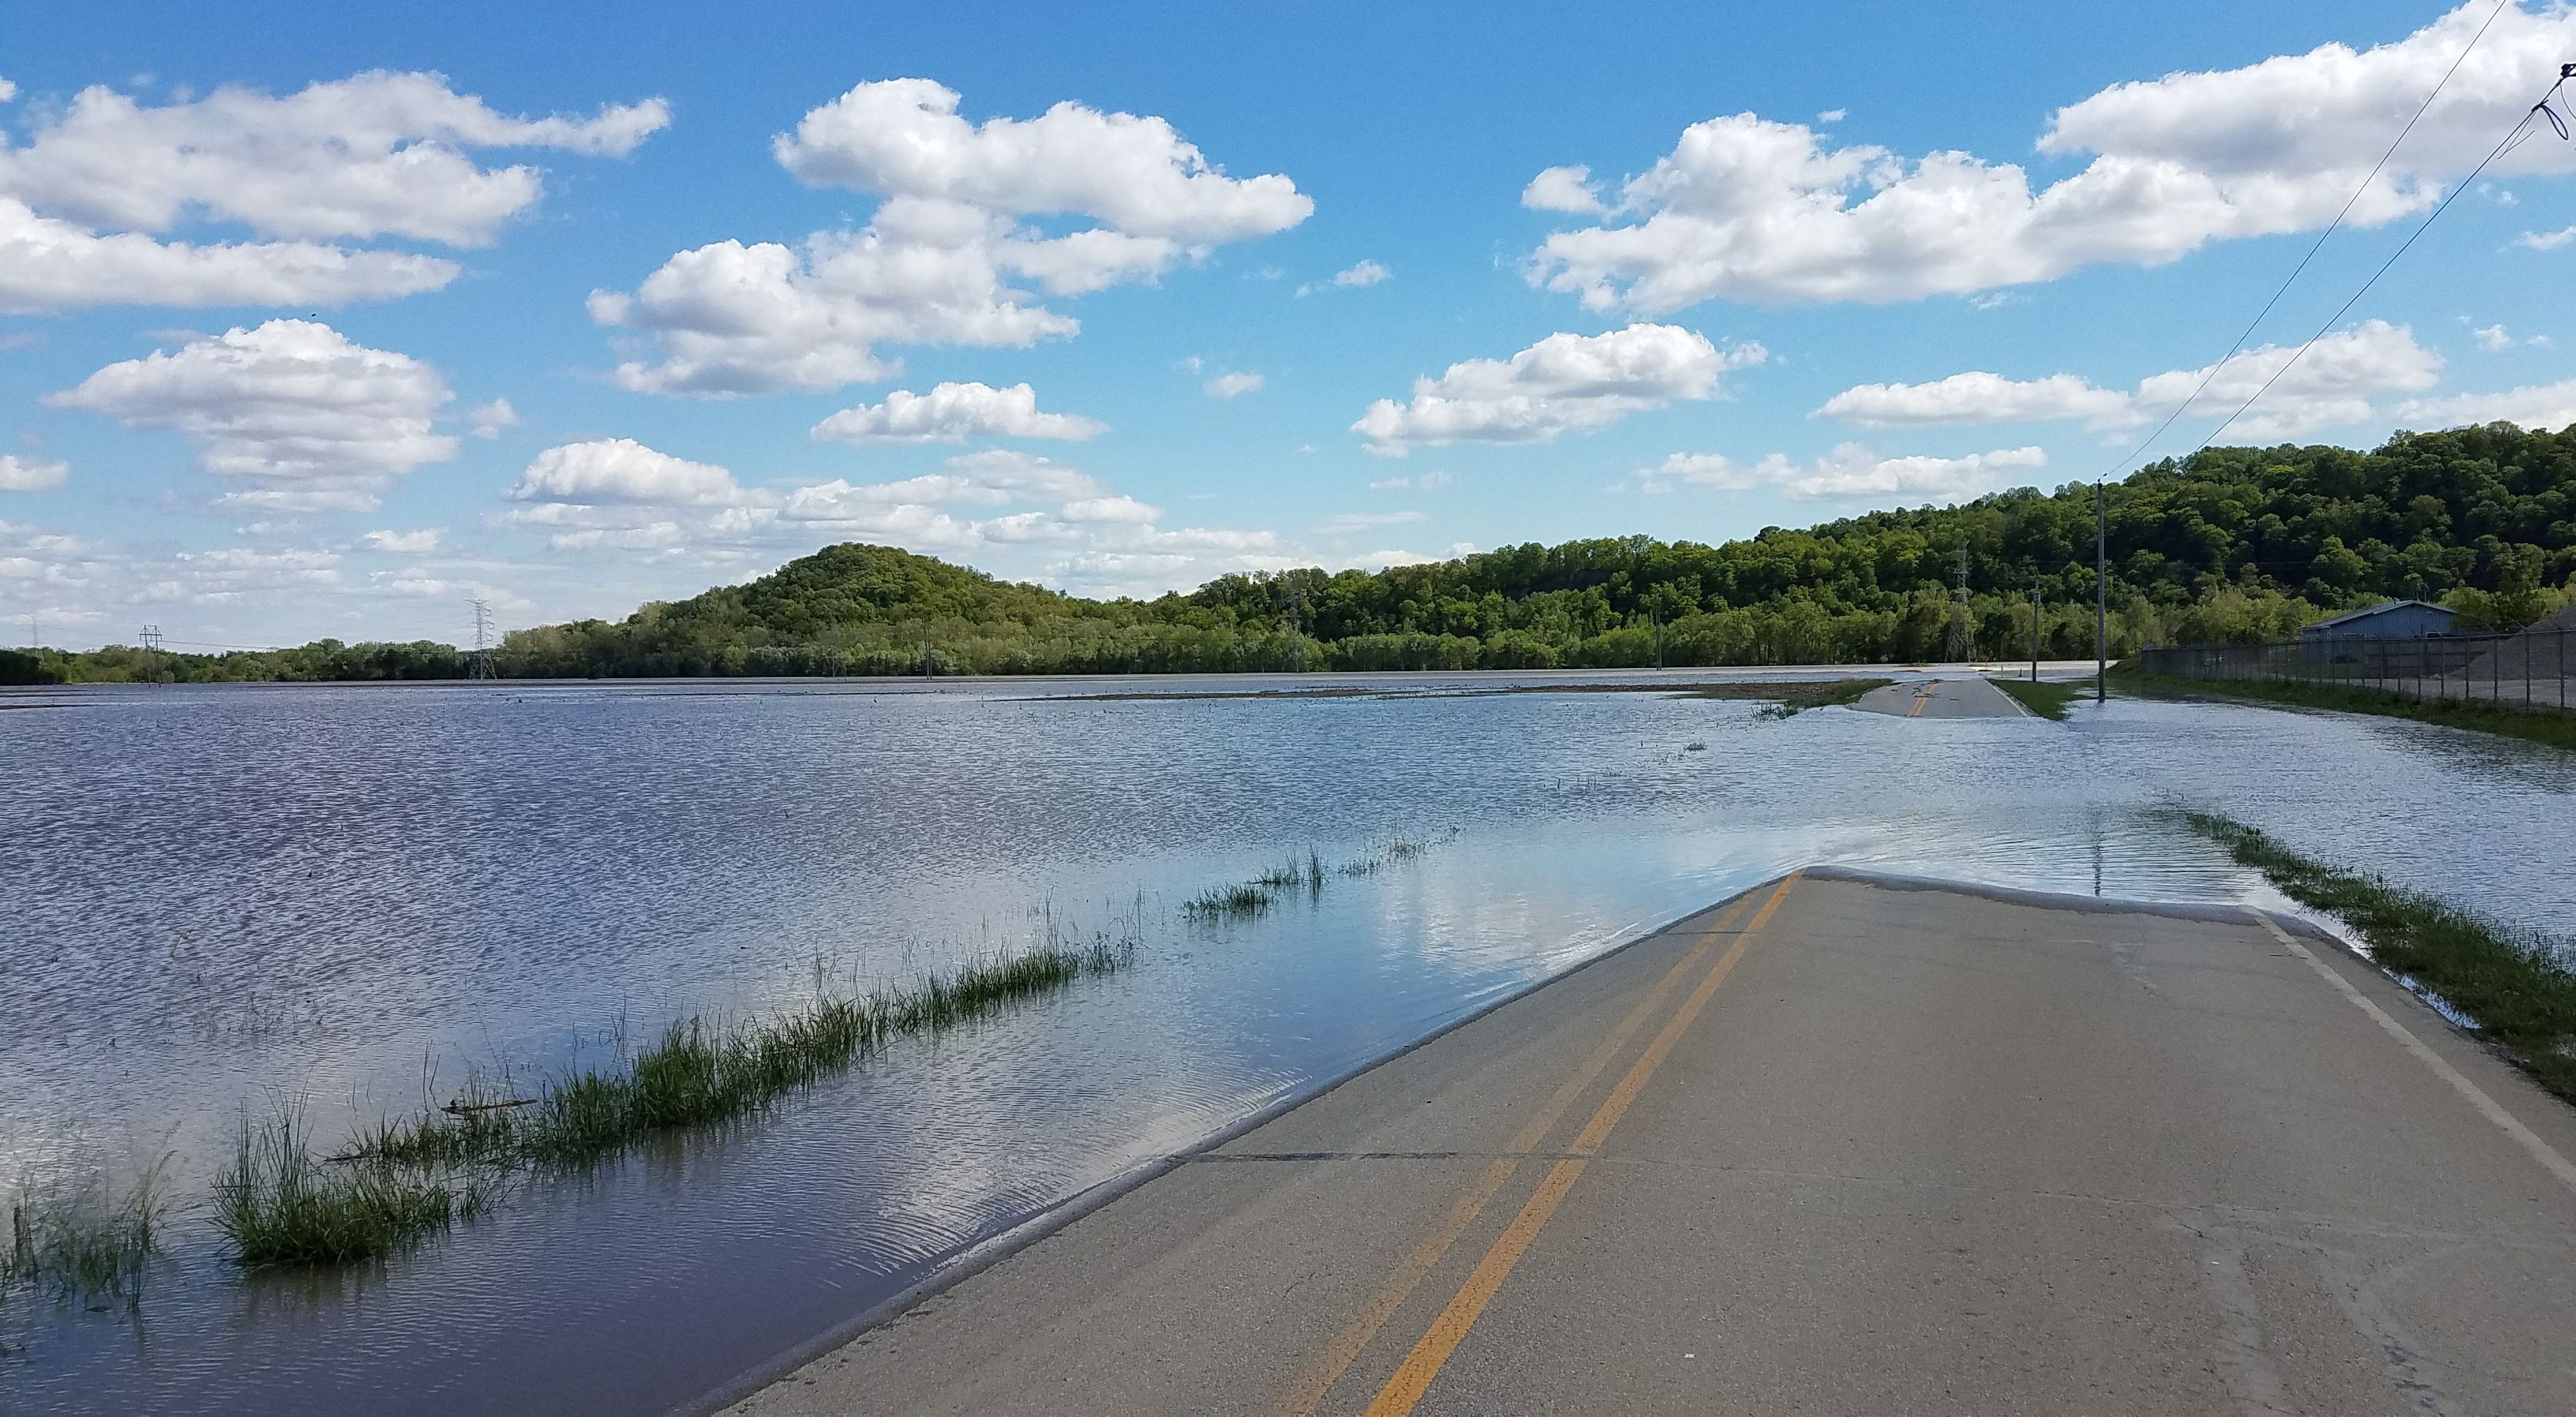 High waters cover an Indiana road.